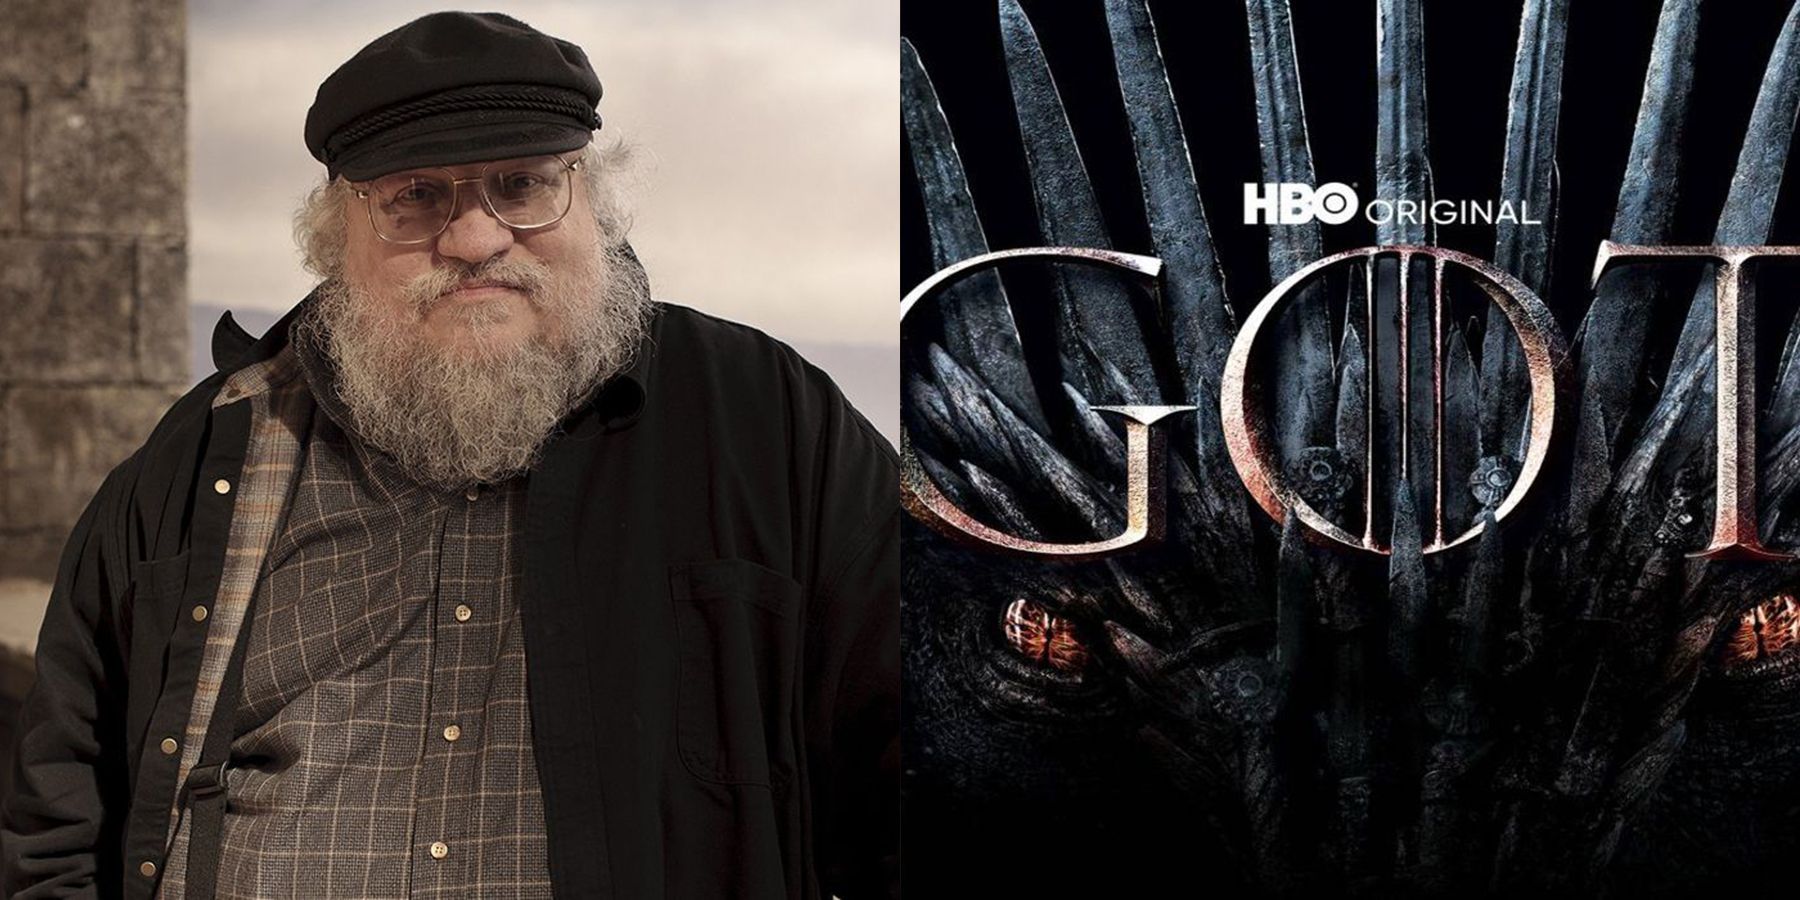 Game of Thrones George RR Martin HBO 10 Seasons